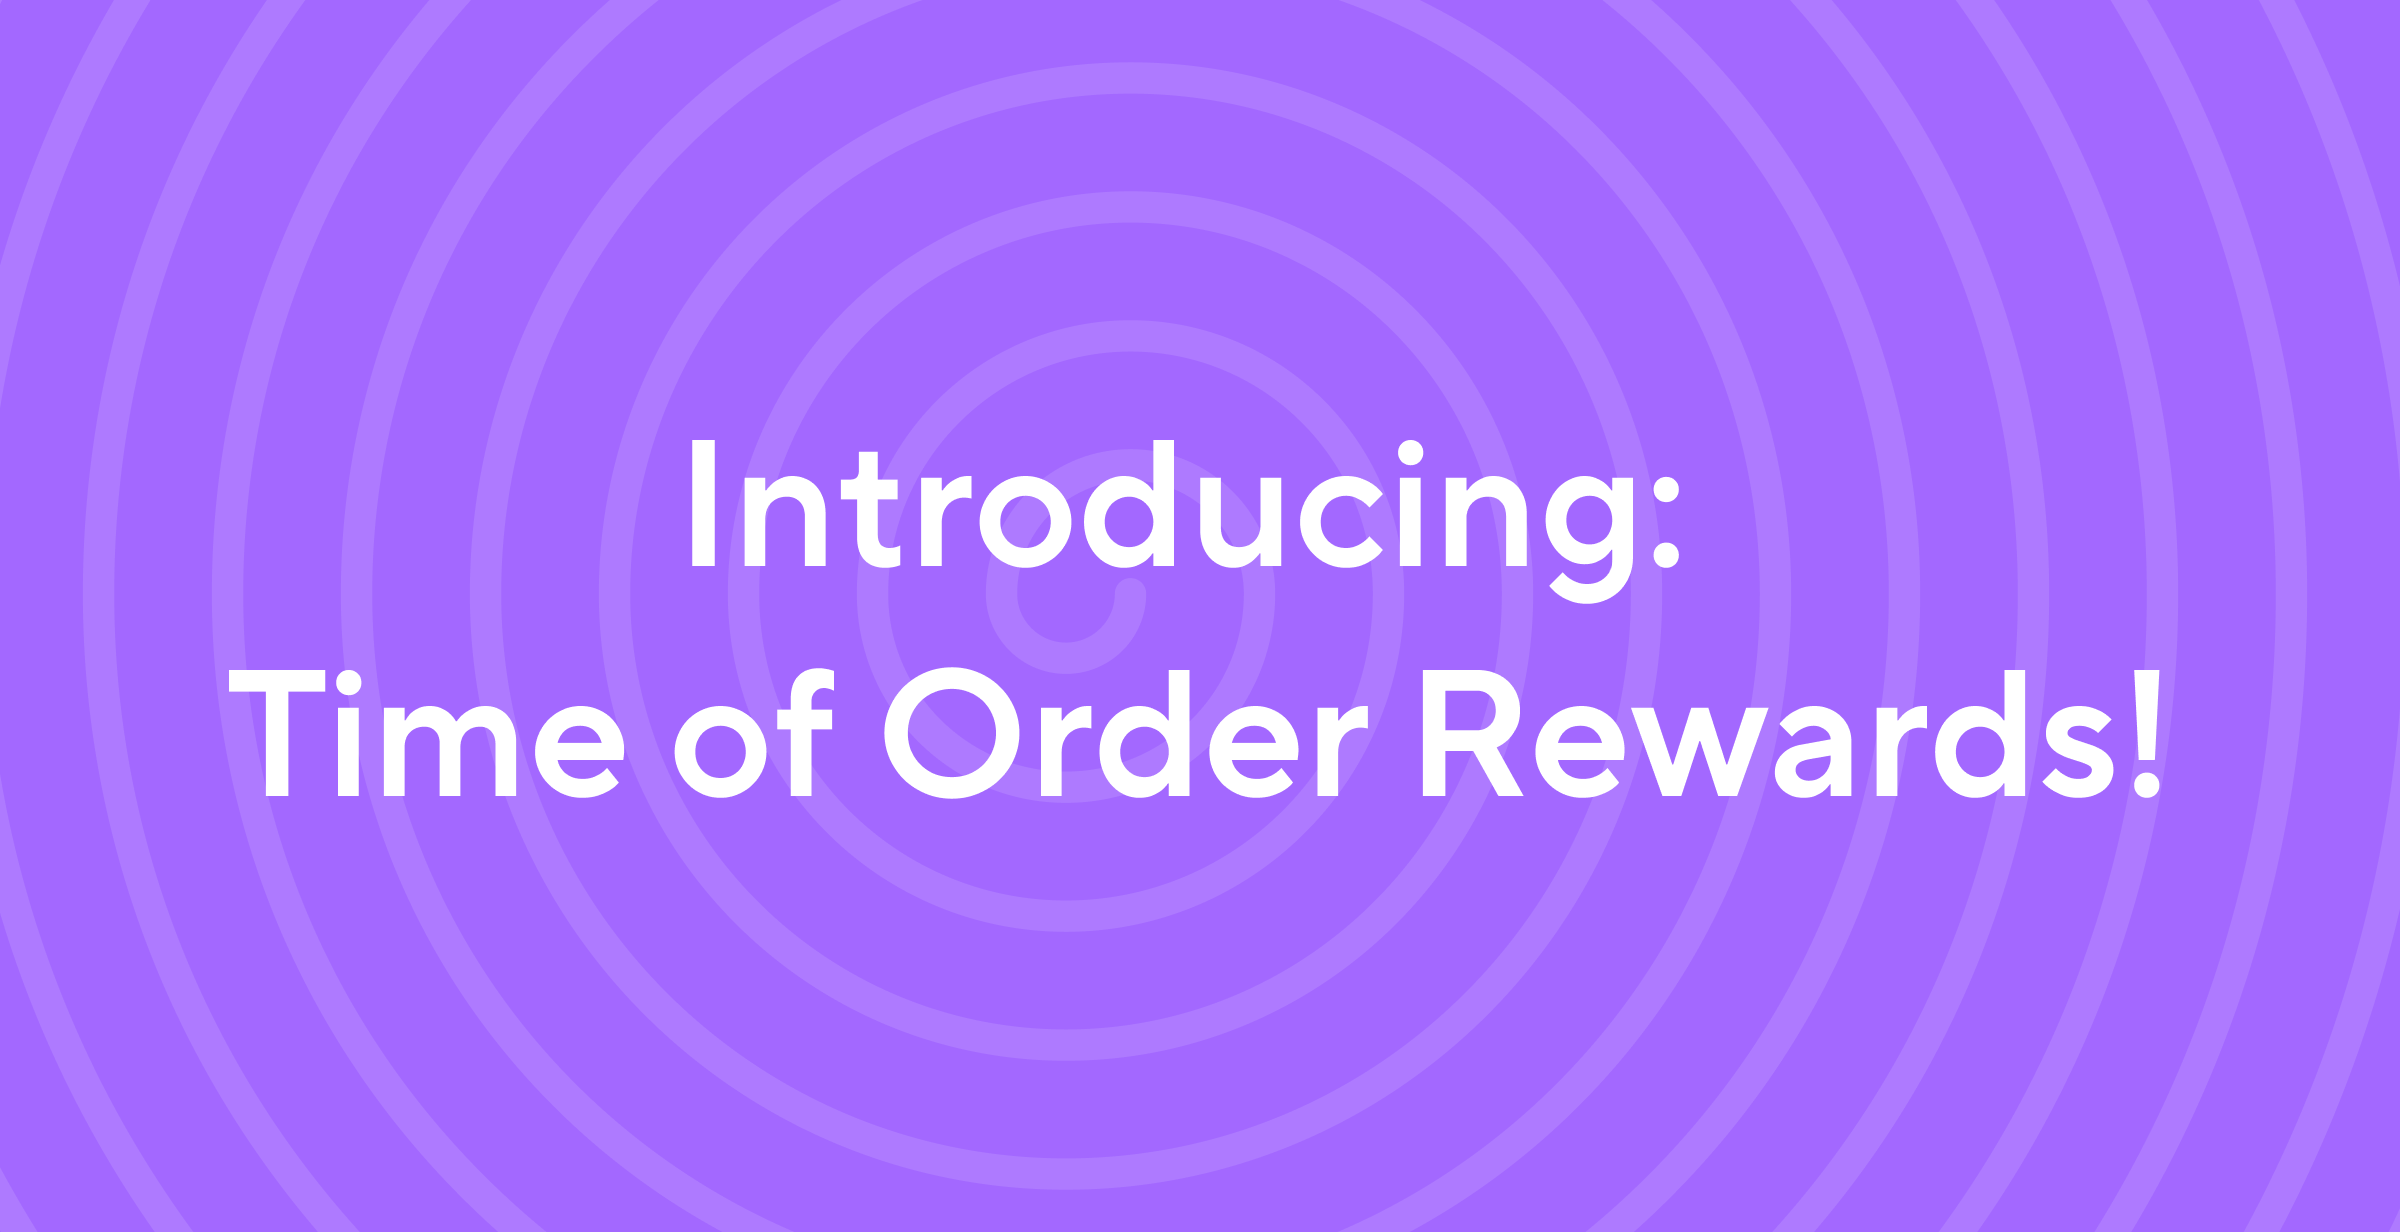 Introducing: Time of Order Rewards